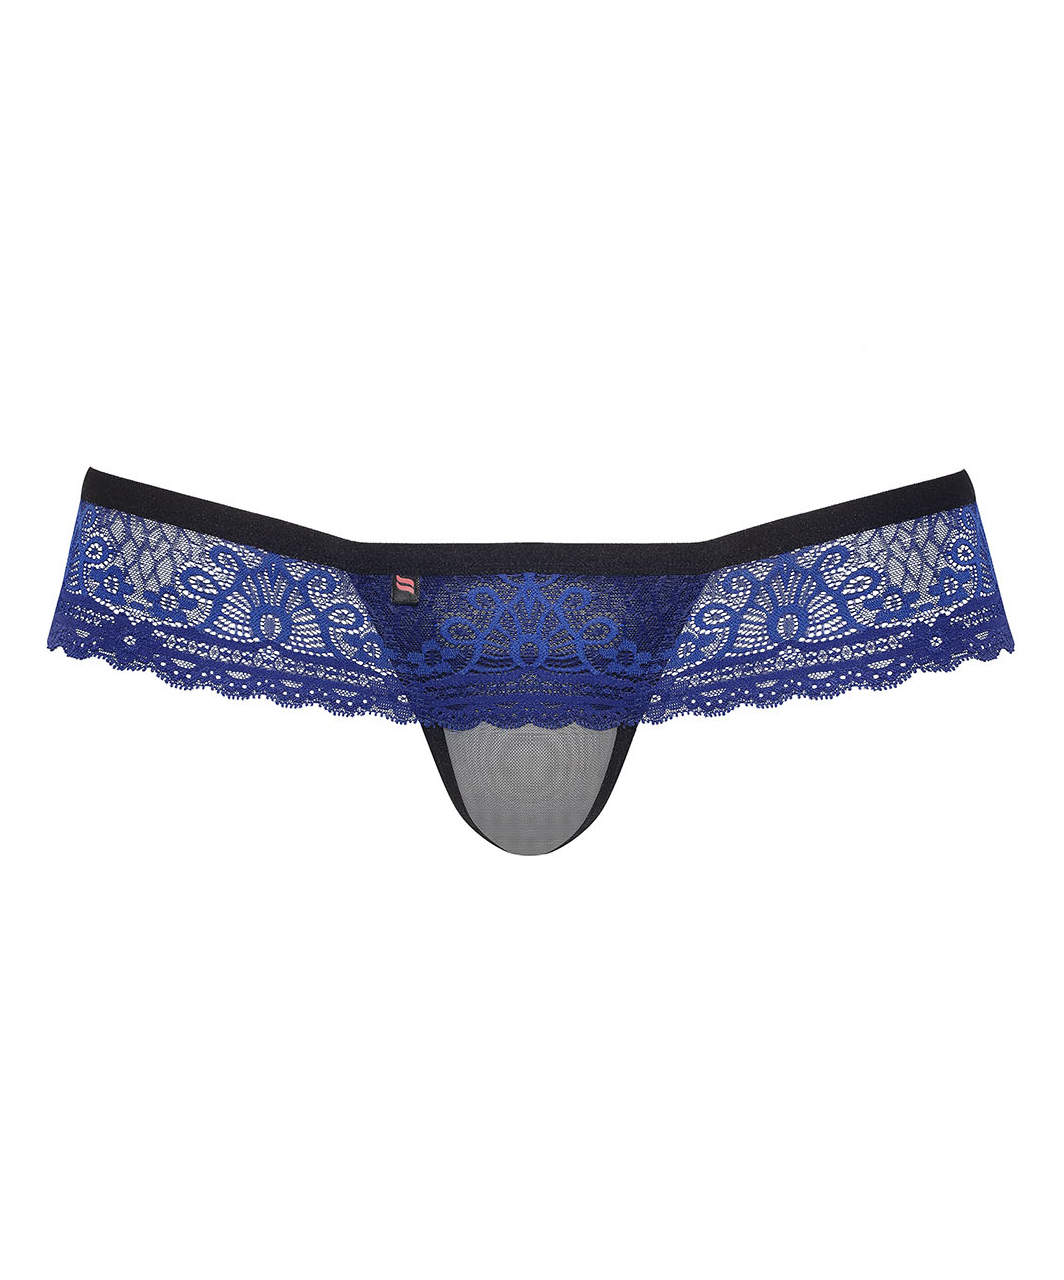 Obsessive blue lace thong